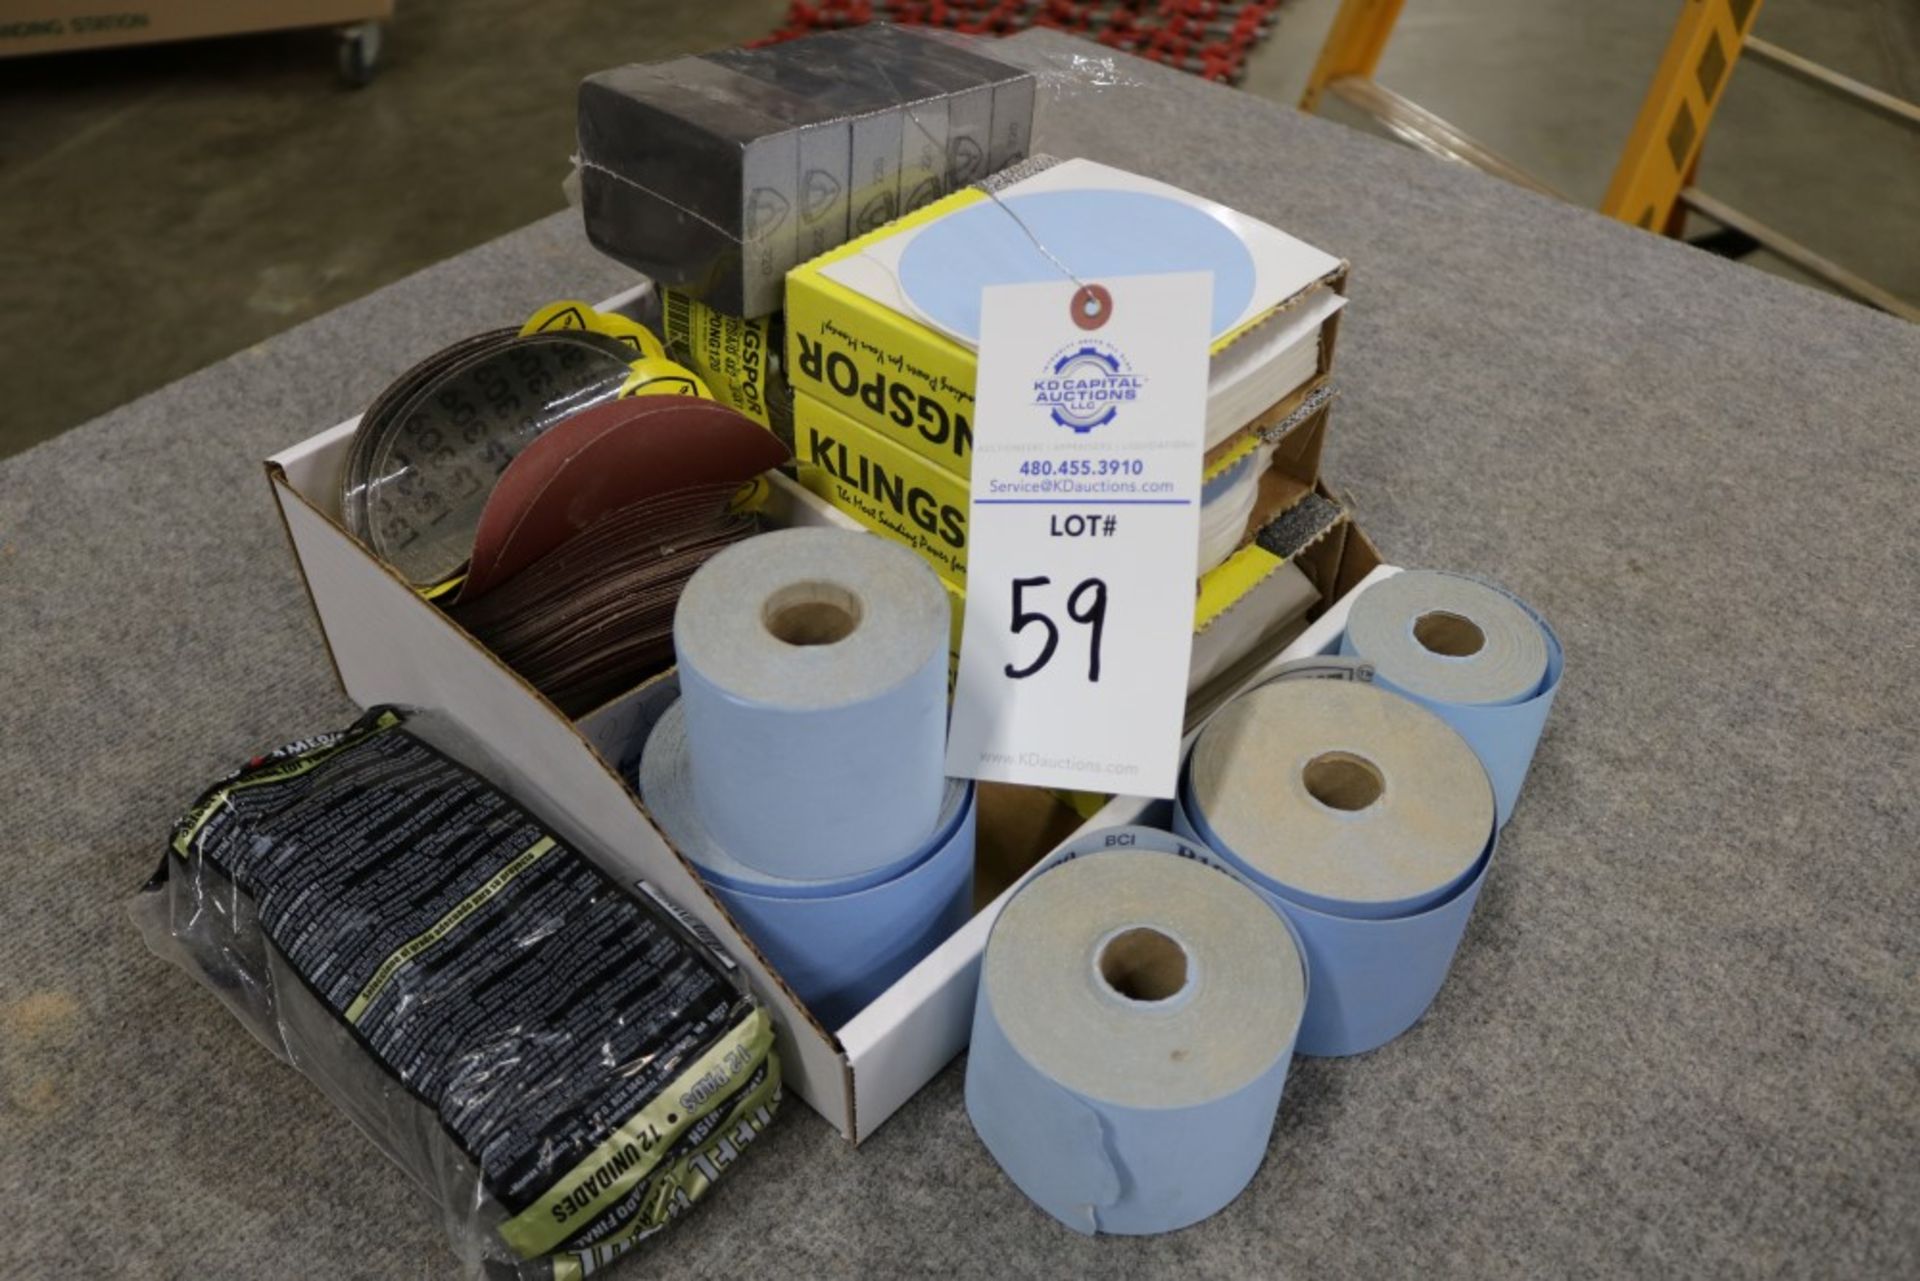 Brand New Box of Sand Paper Rolls and Replacement Orbital Sand Paper Pads and Sand Paper Sponges, - Image 4 of 5